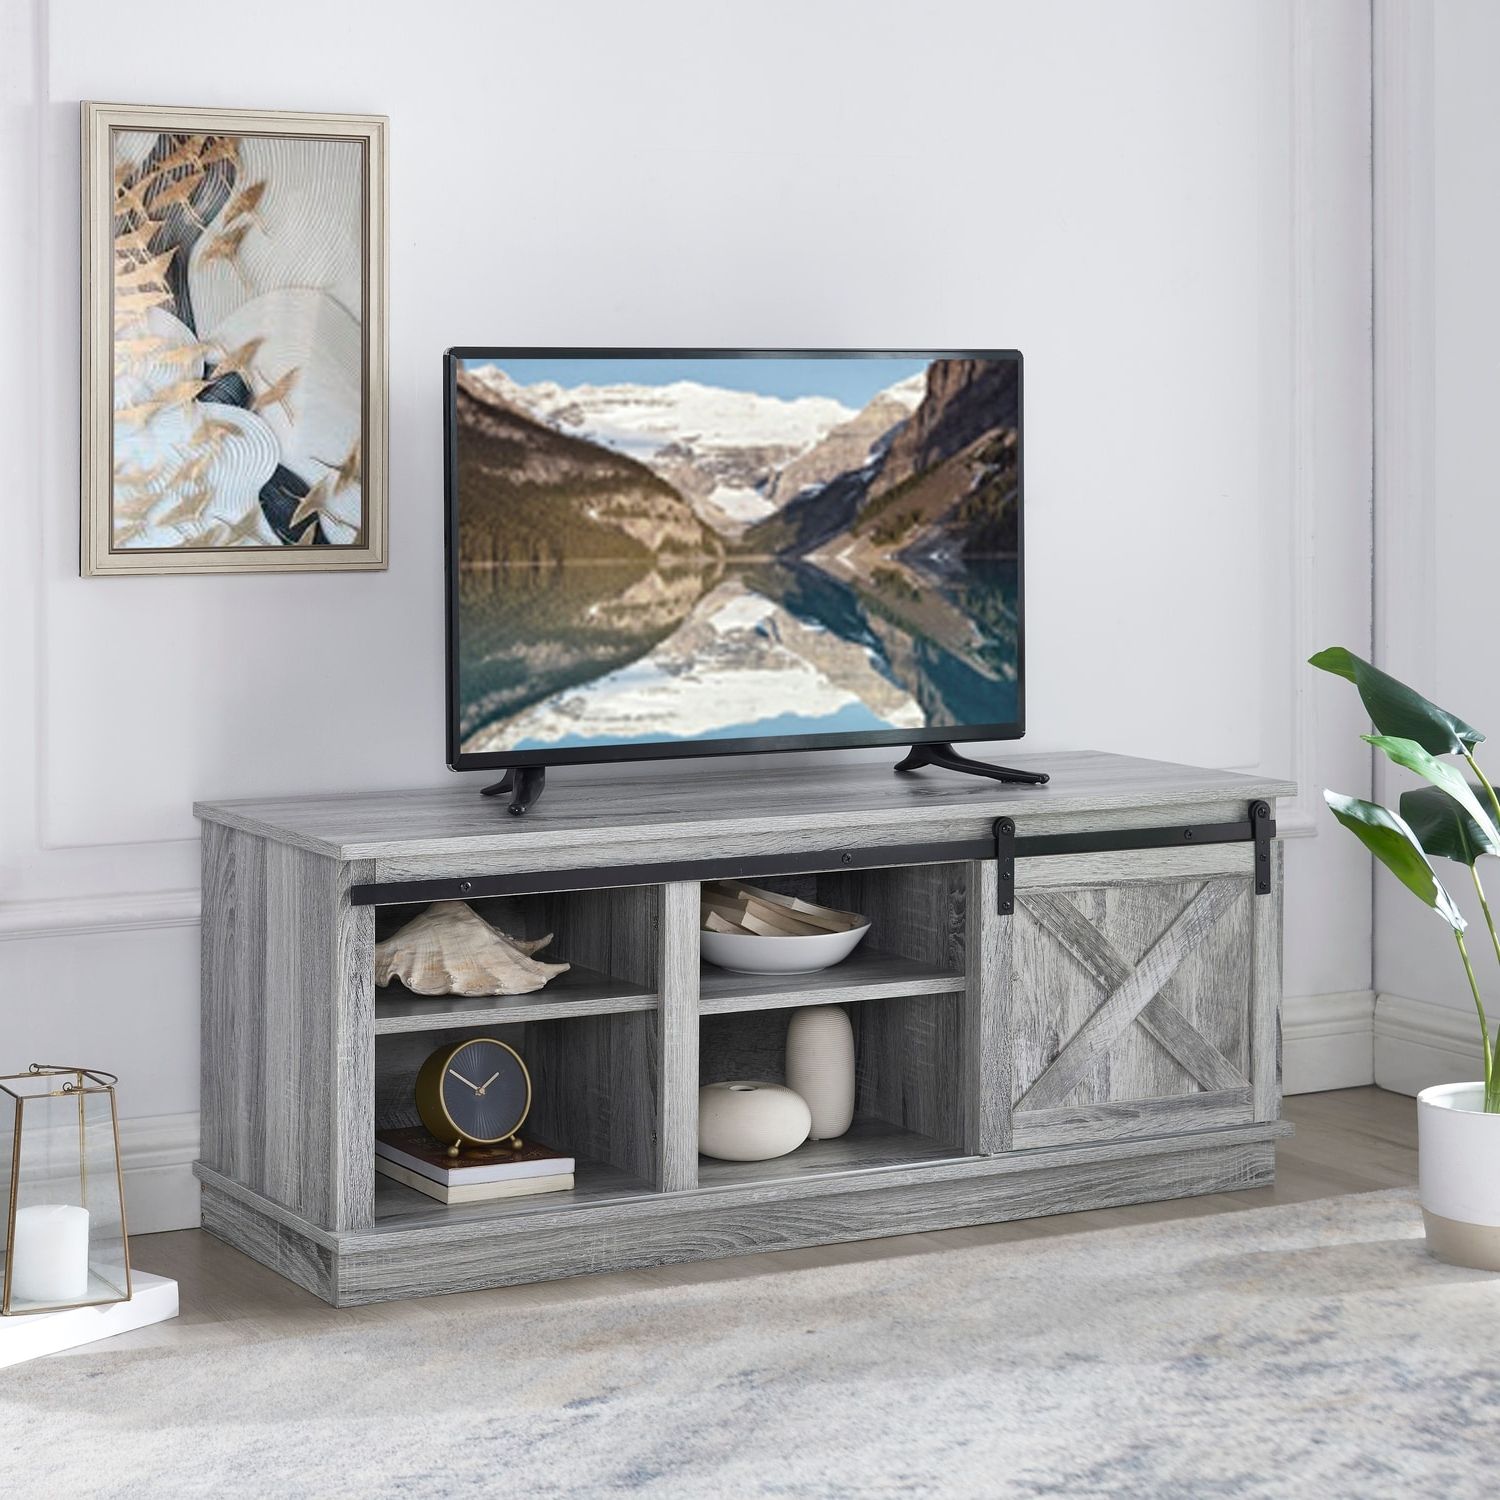 Low Profile Sliding Barn Door Farmhouse Tv Stand Cabinet For 50" Tv With Storage  Shelf, Entertainment Center, Media Console – Bed Bath & Beyond – 35065989 In Farmhouse Stands With Shelves (View 6 of 20)